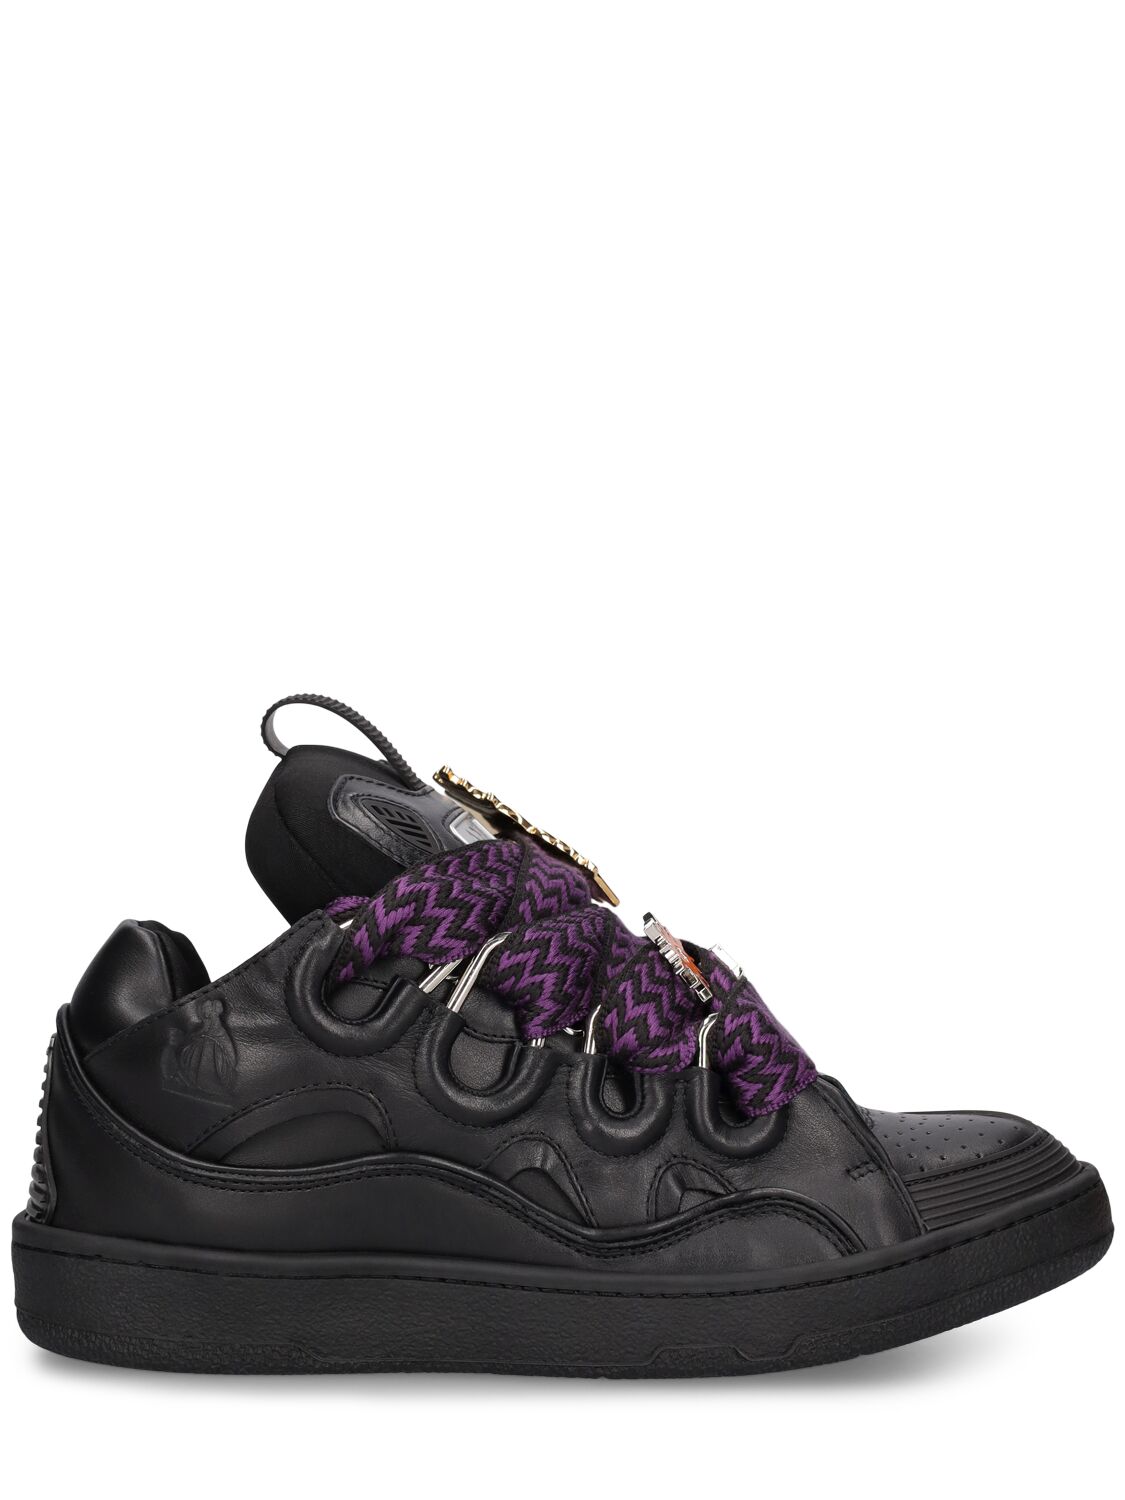 Lanvin Curb Leather And Pins Sneakers In Black